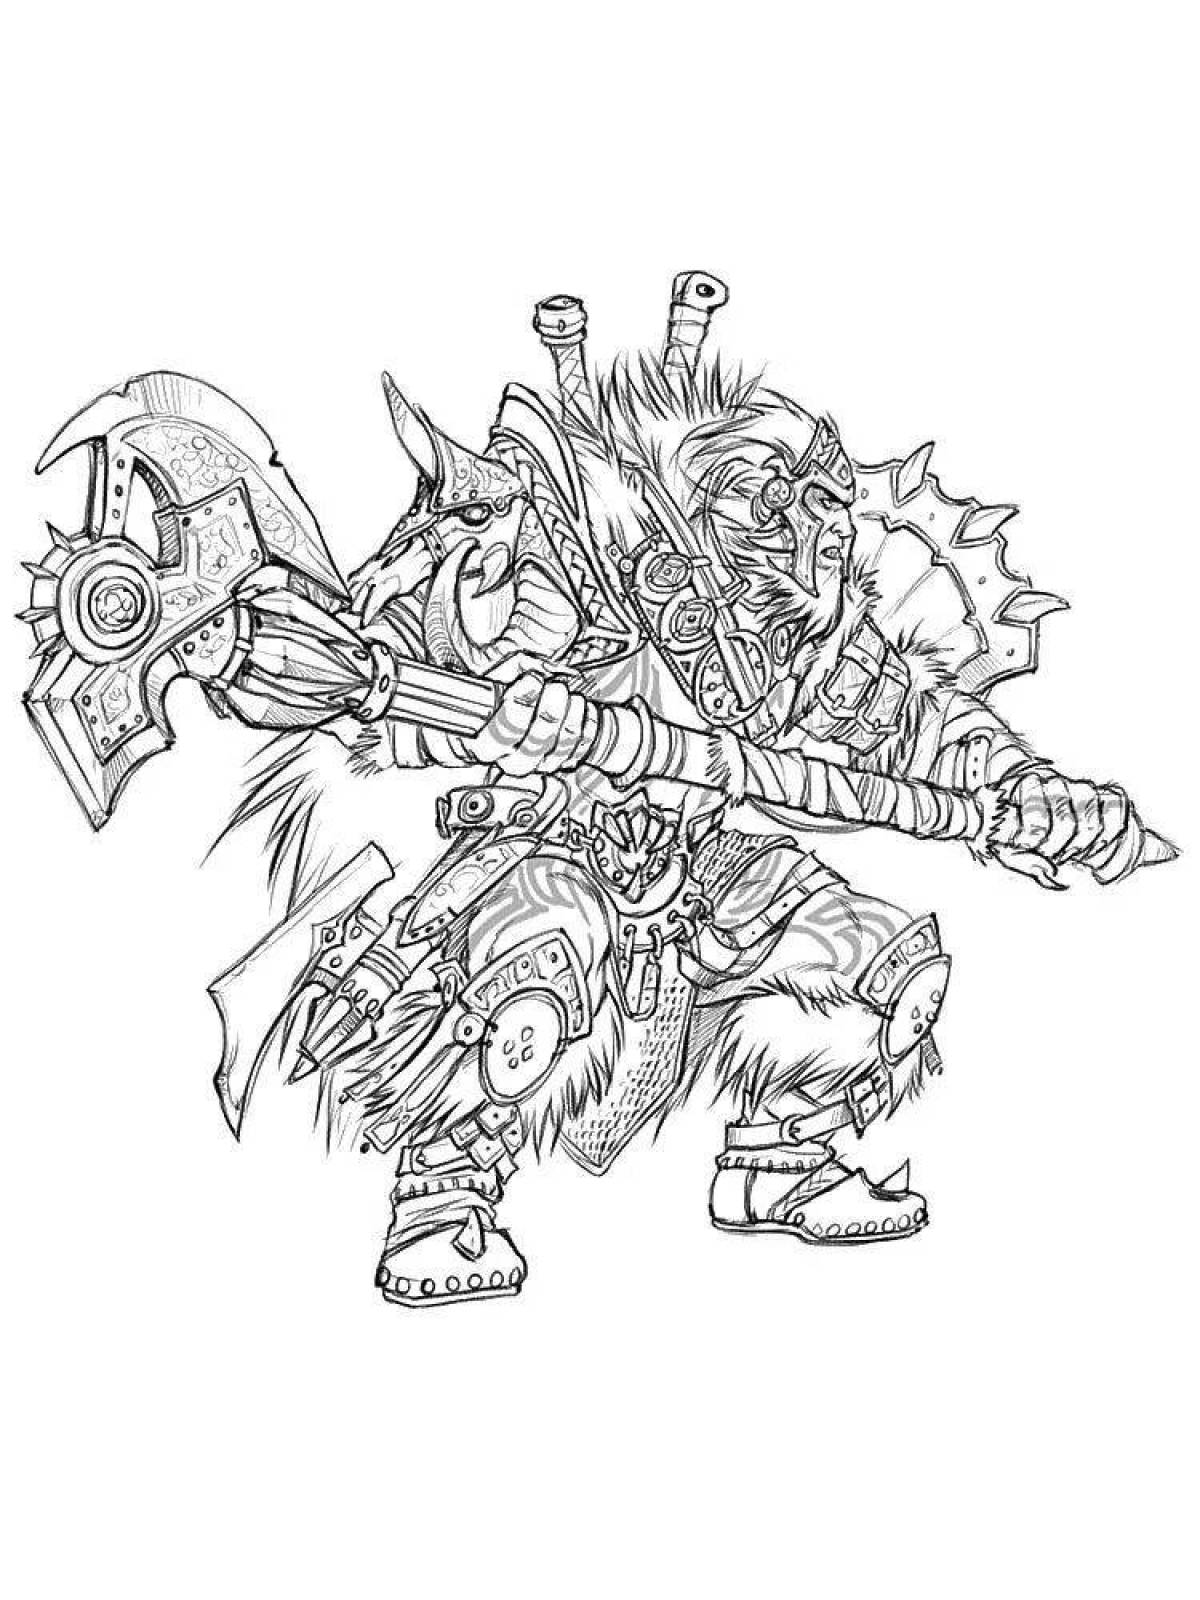 Dynamic Warden coloring page